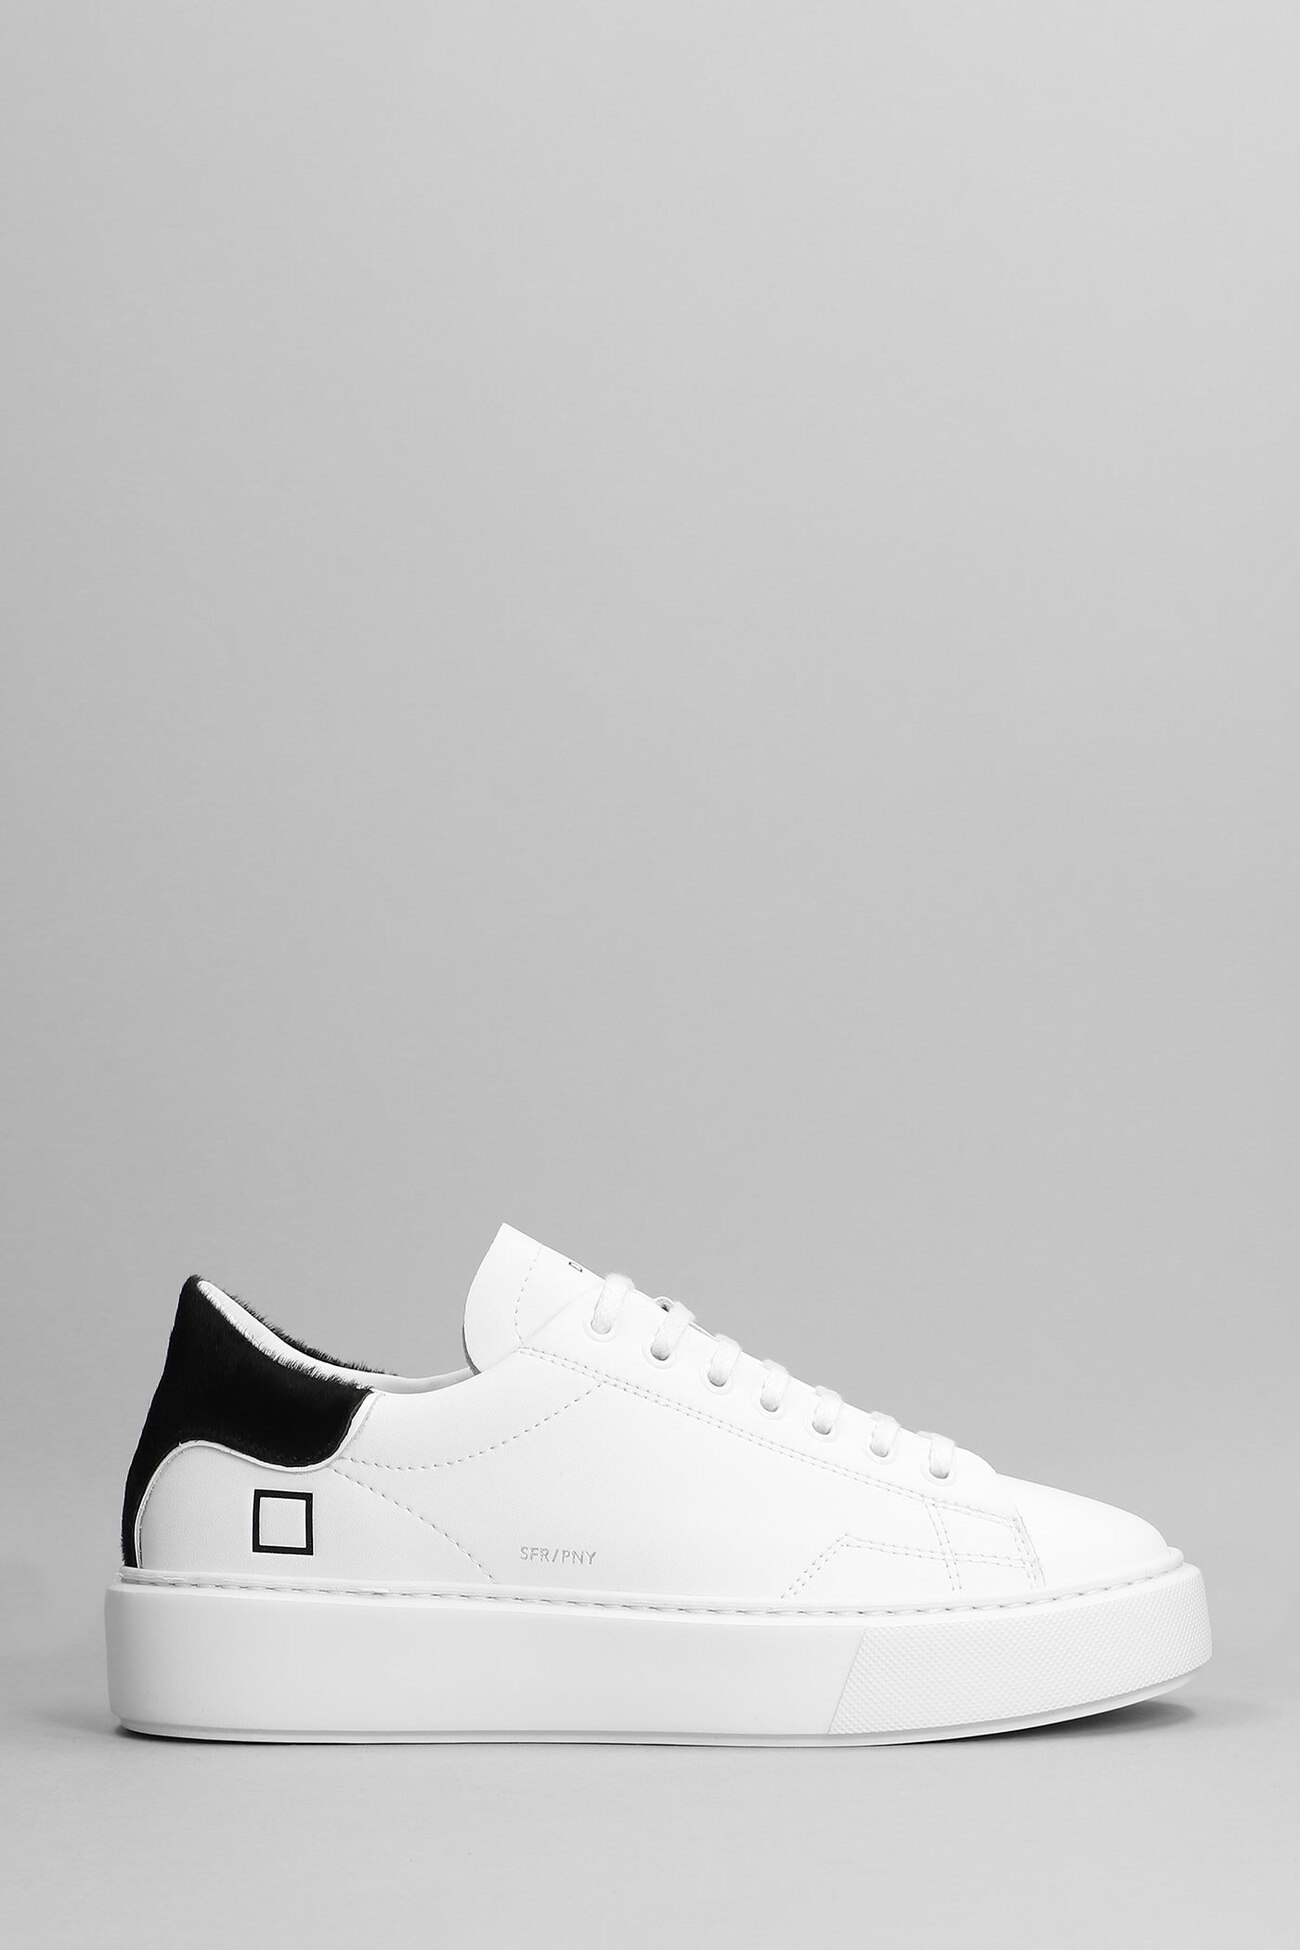 D.A.T.E. D.A.T.E. Sfera Pony Sneakers In White Leather And Fabric